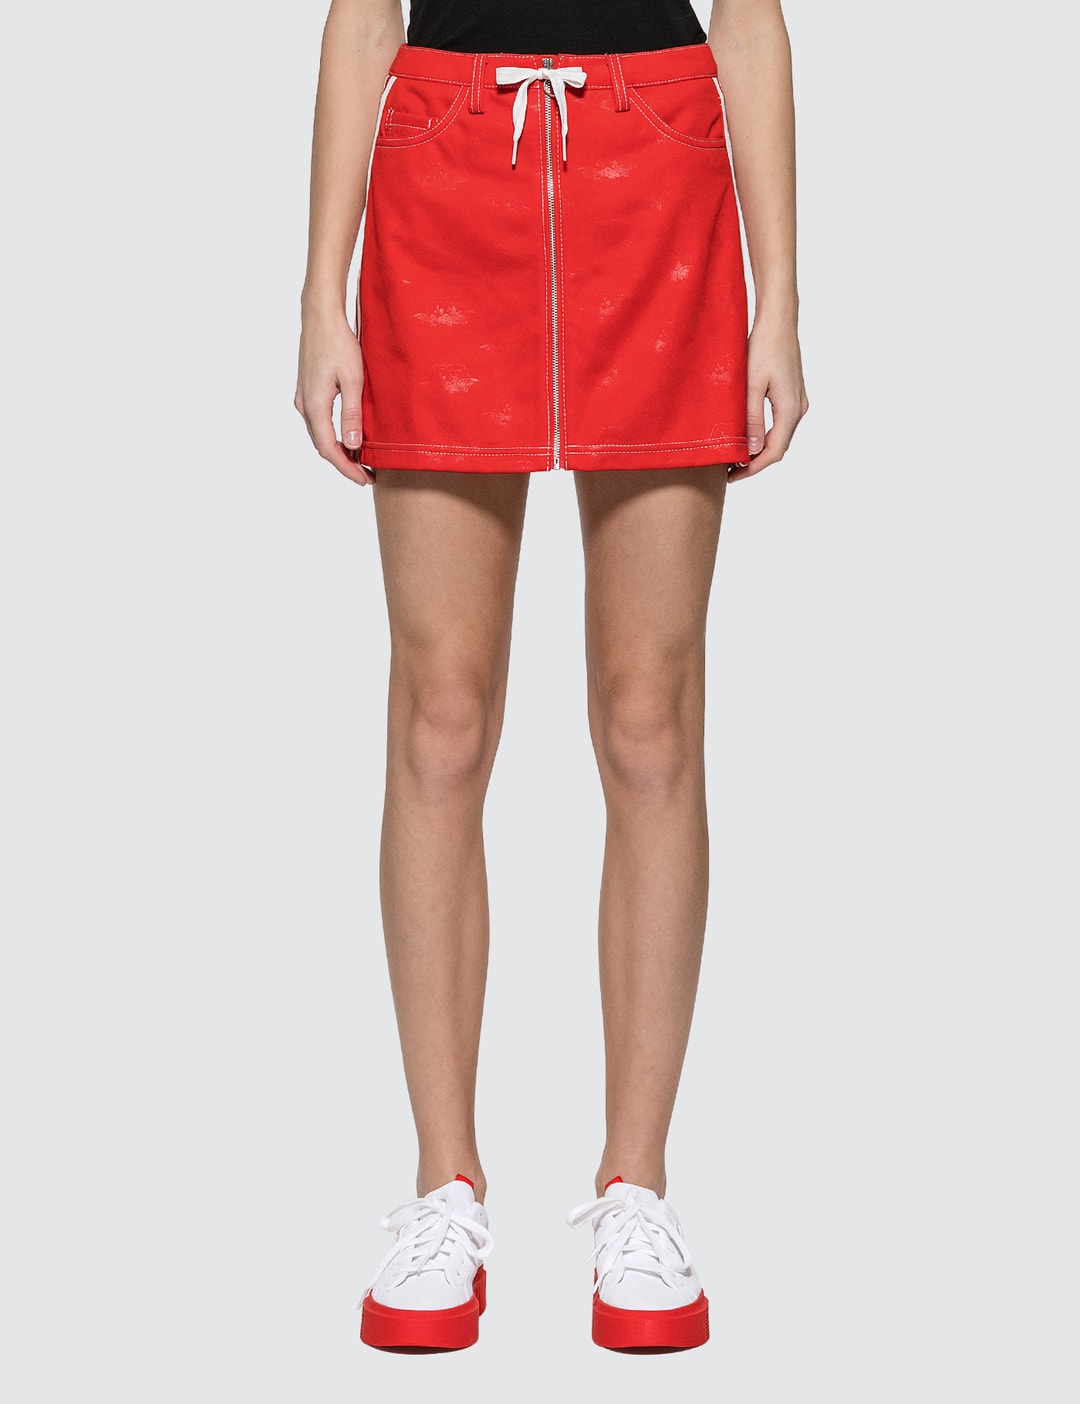 Adidas - Adidas Originals x Fiorucci Skirt | HBX - Globally Curated Fashion and by Hypebeast